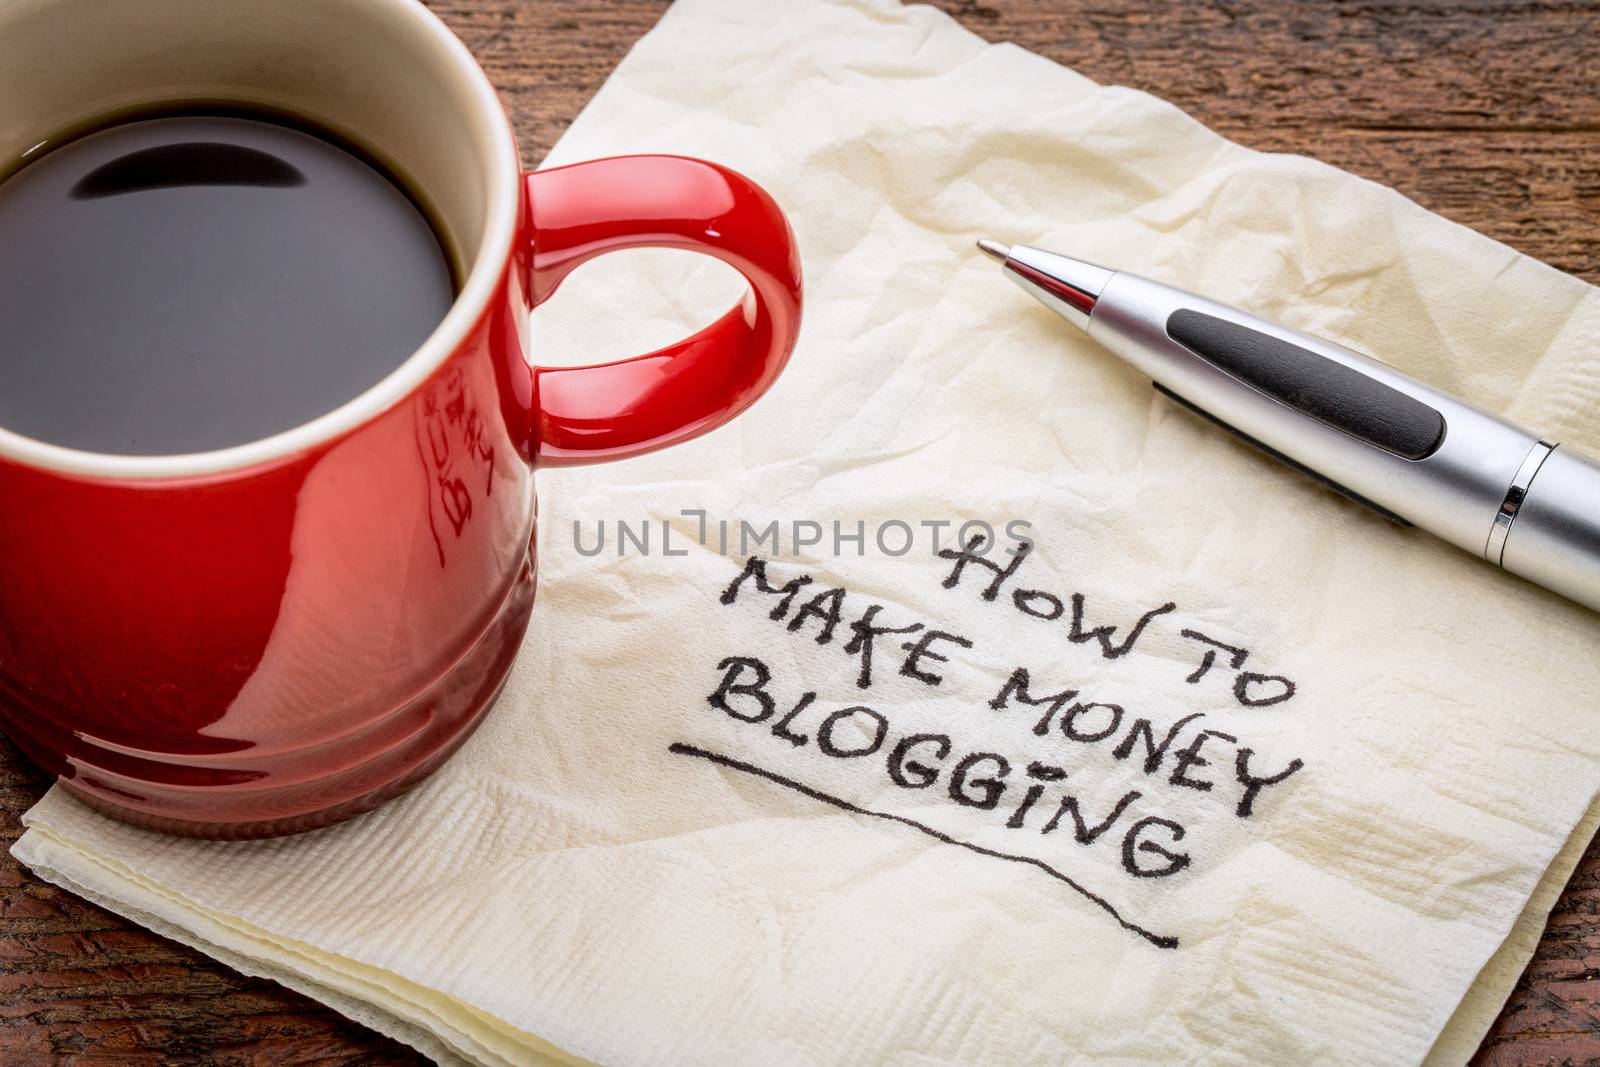 How to make money blogging by PixelsAway